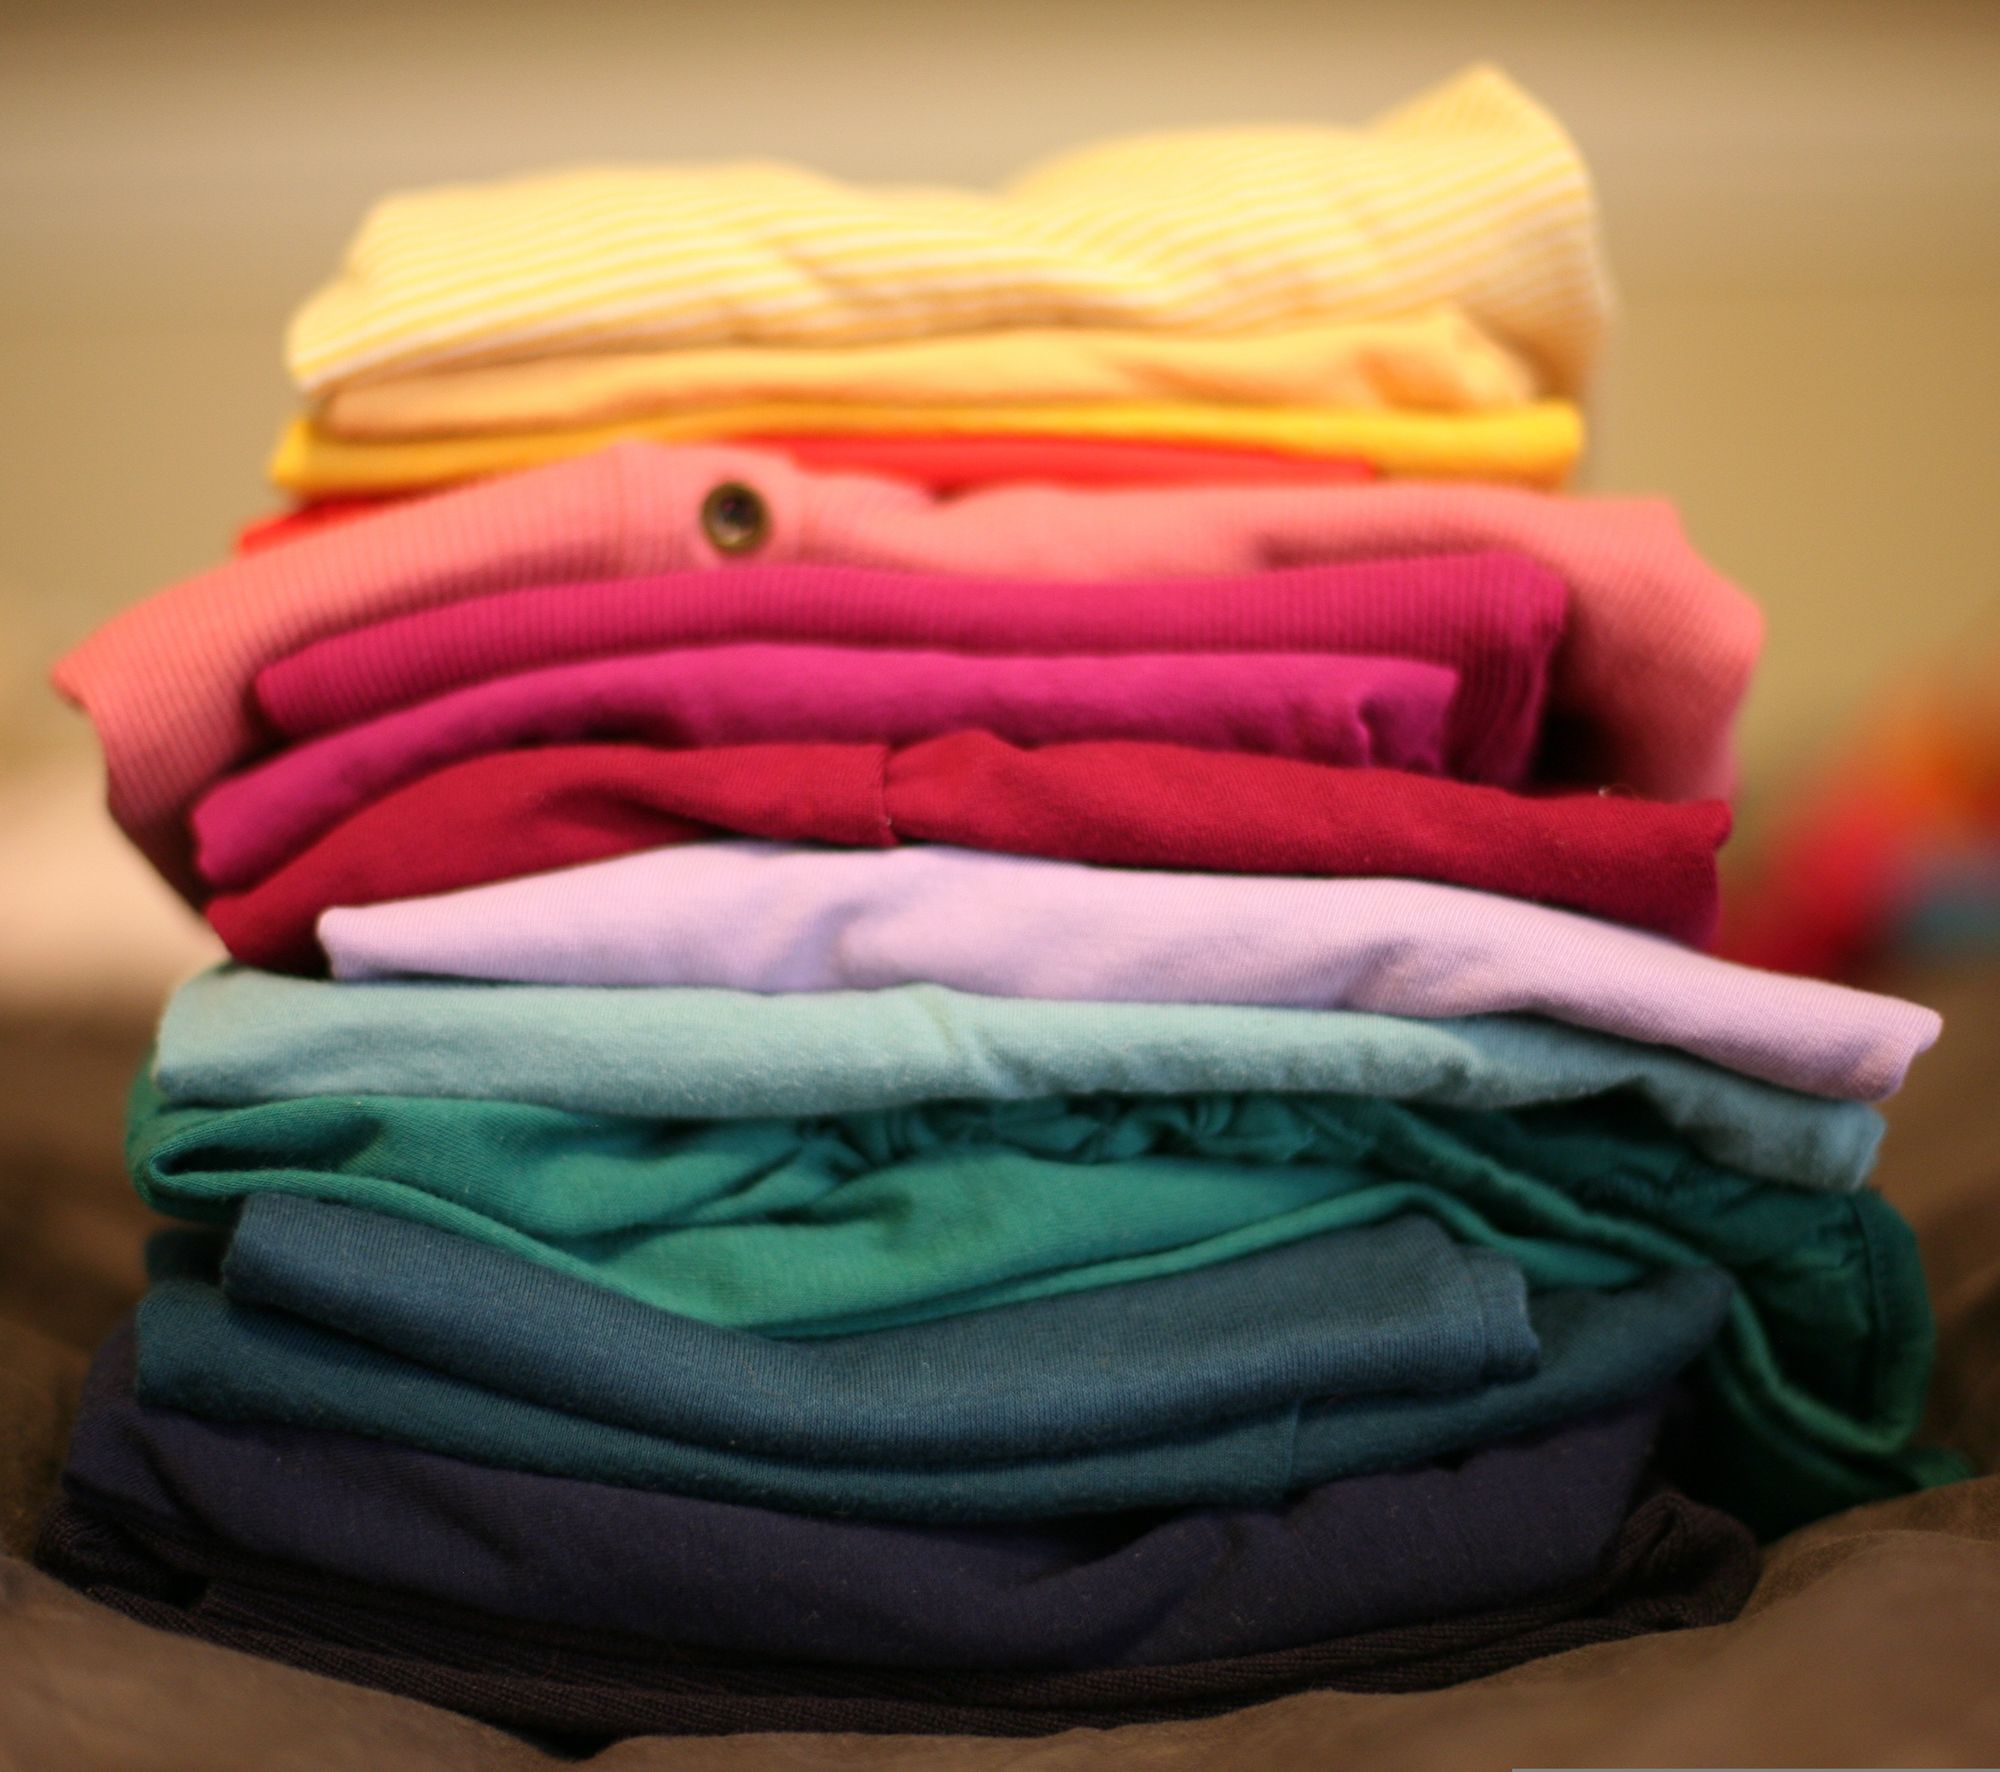 A stack of folded clothes